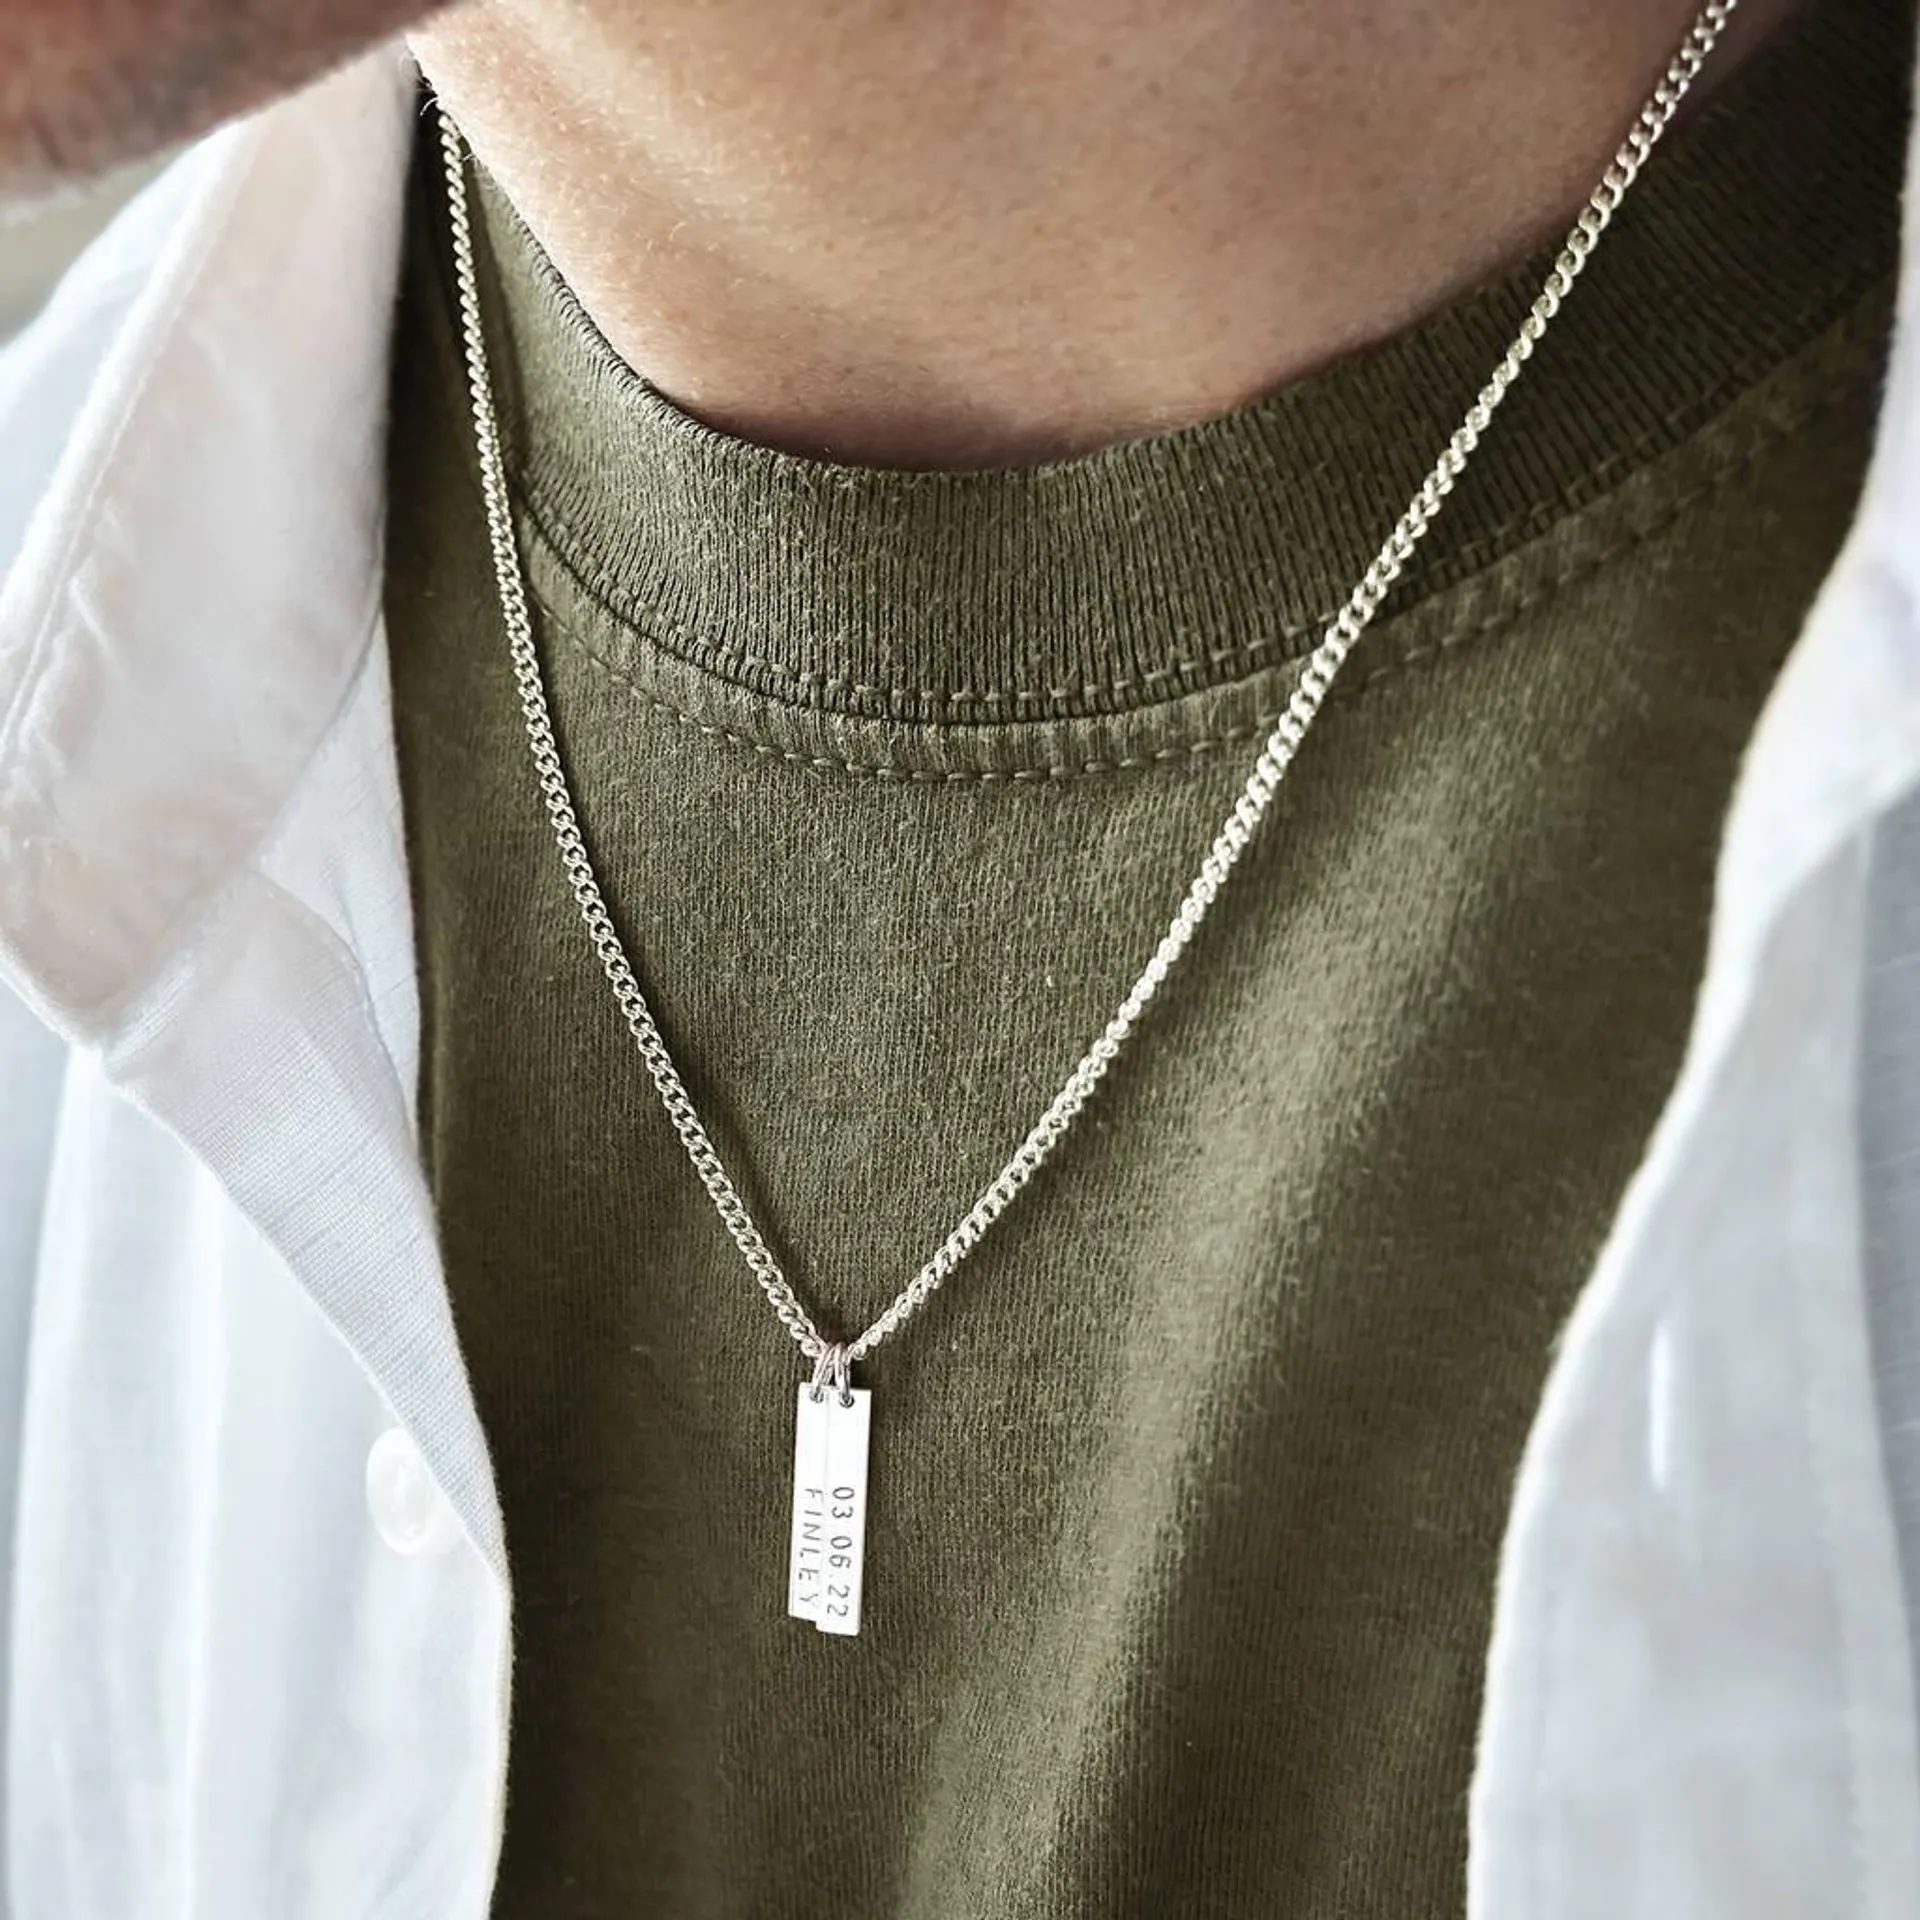 Personalised Men's Silver Tag Necklace